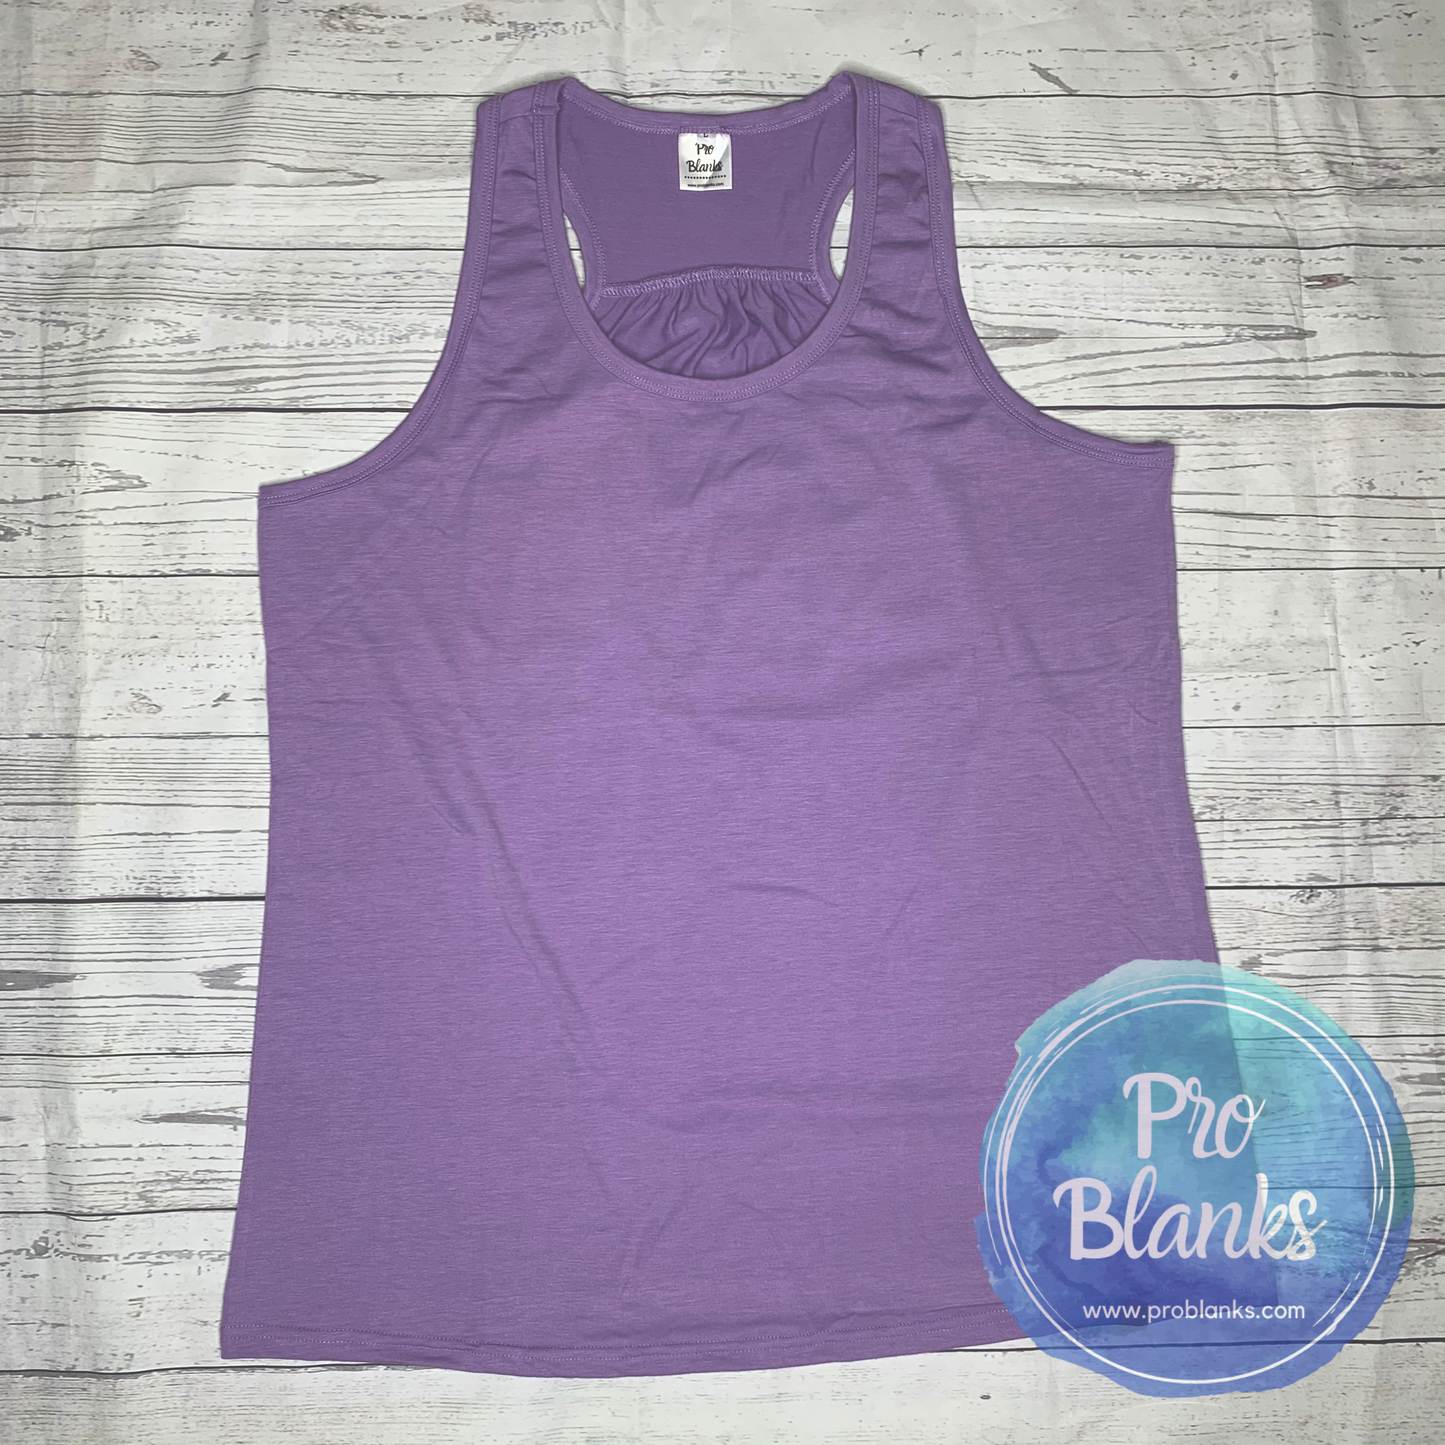 RTS- ADULT TANK TOP - 100% Polyester with Soft Cotton Feel